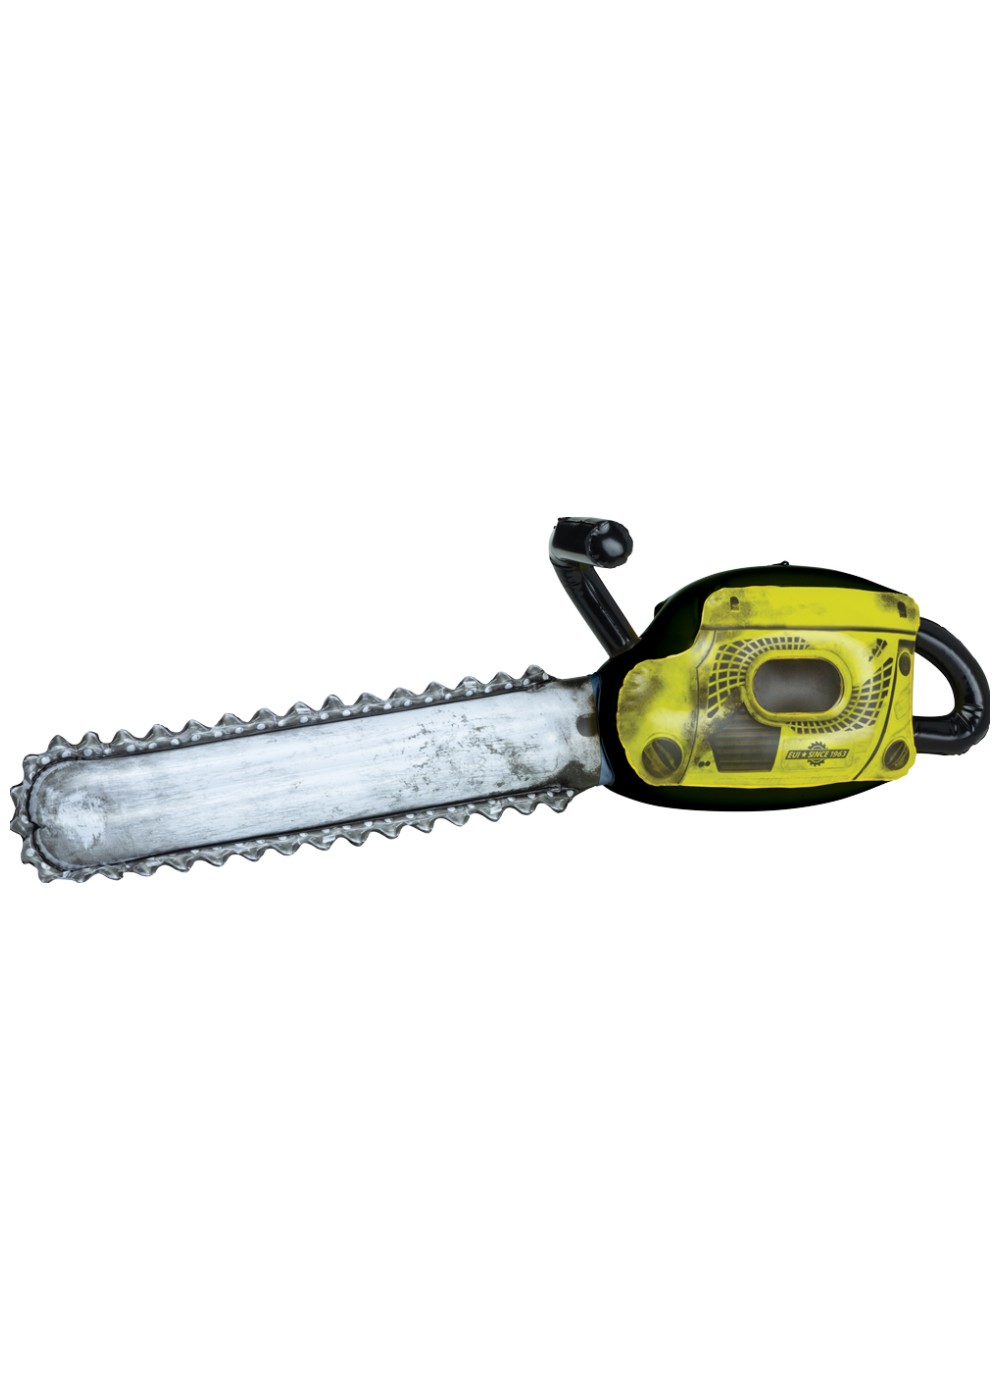 Realistic Inflatable Chainsaw